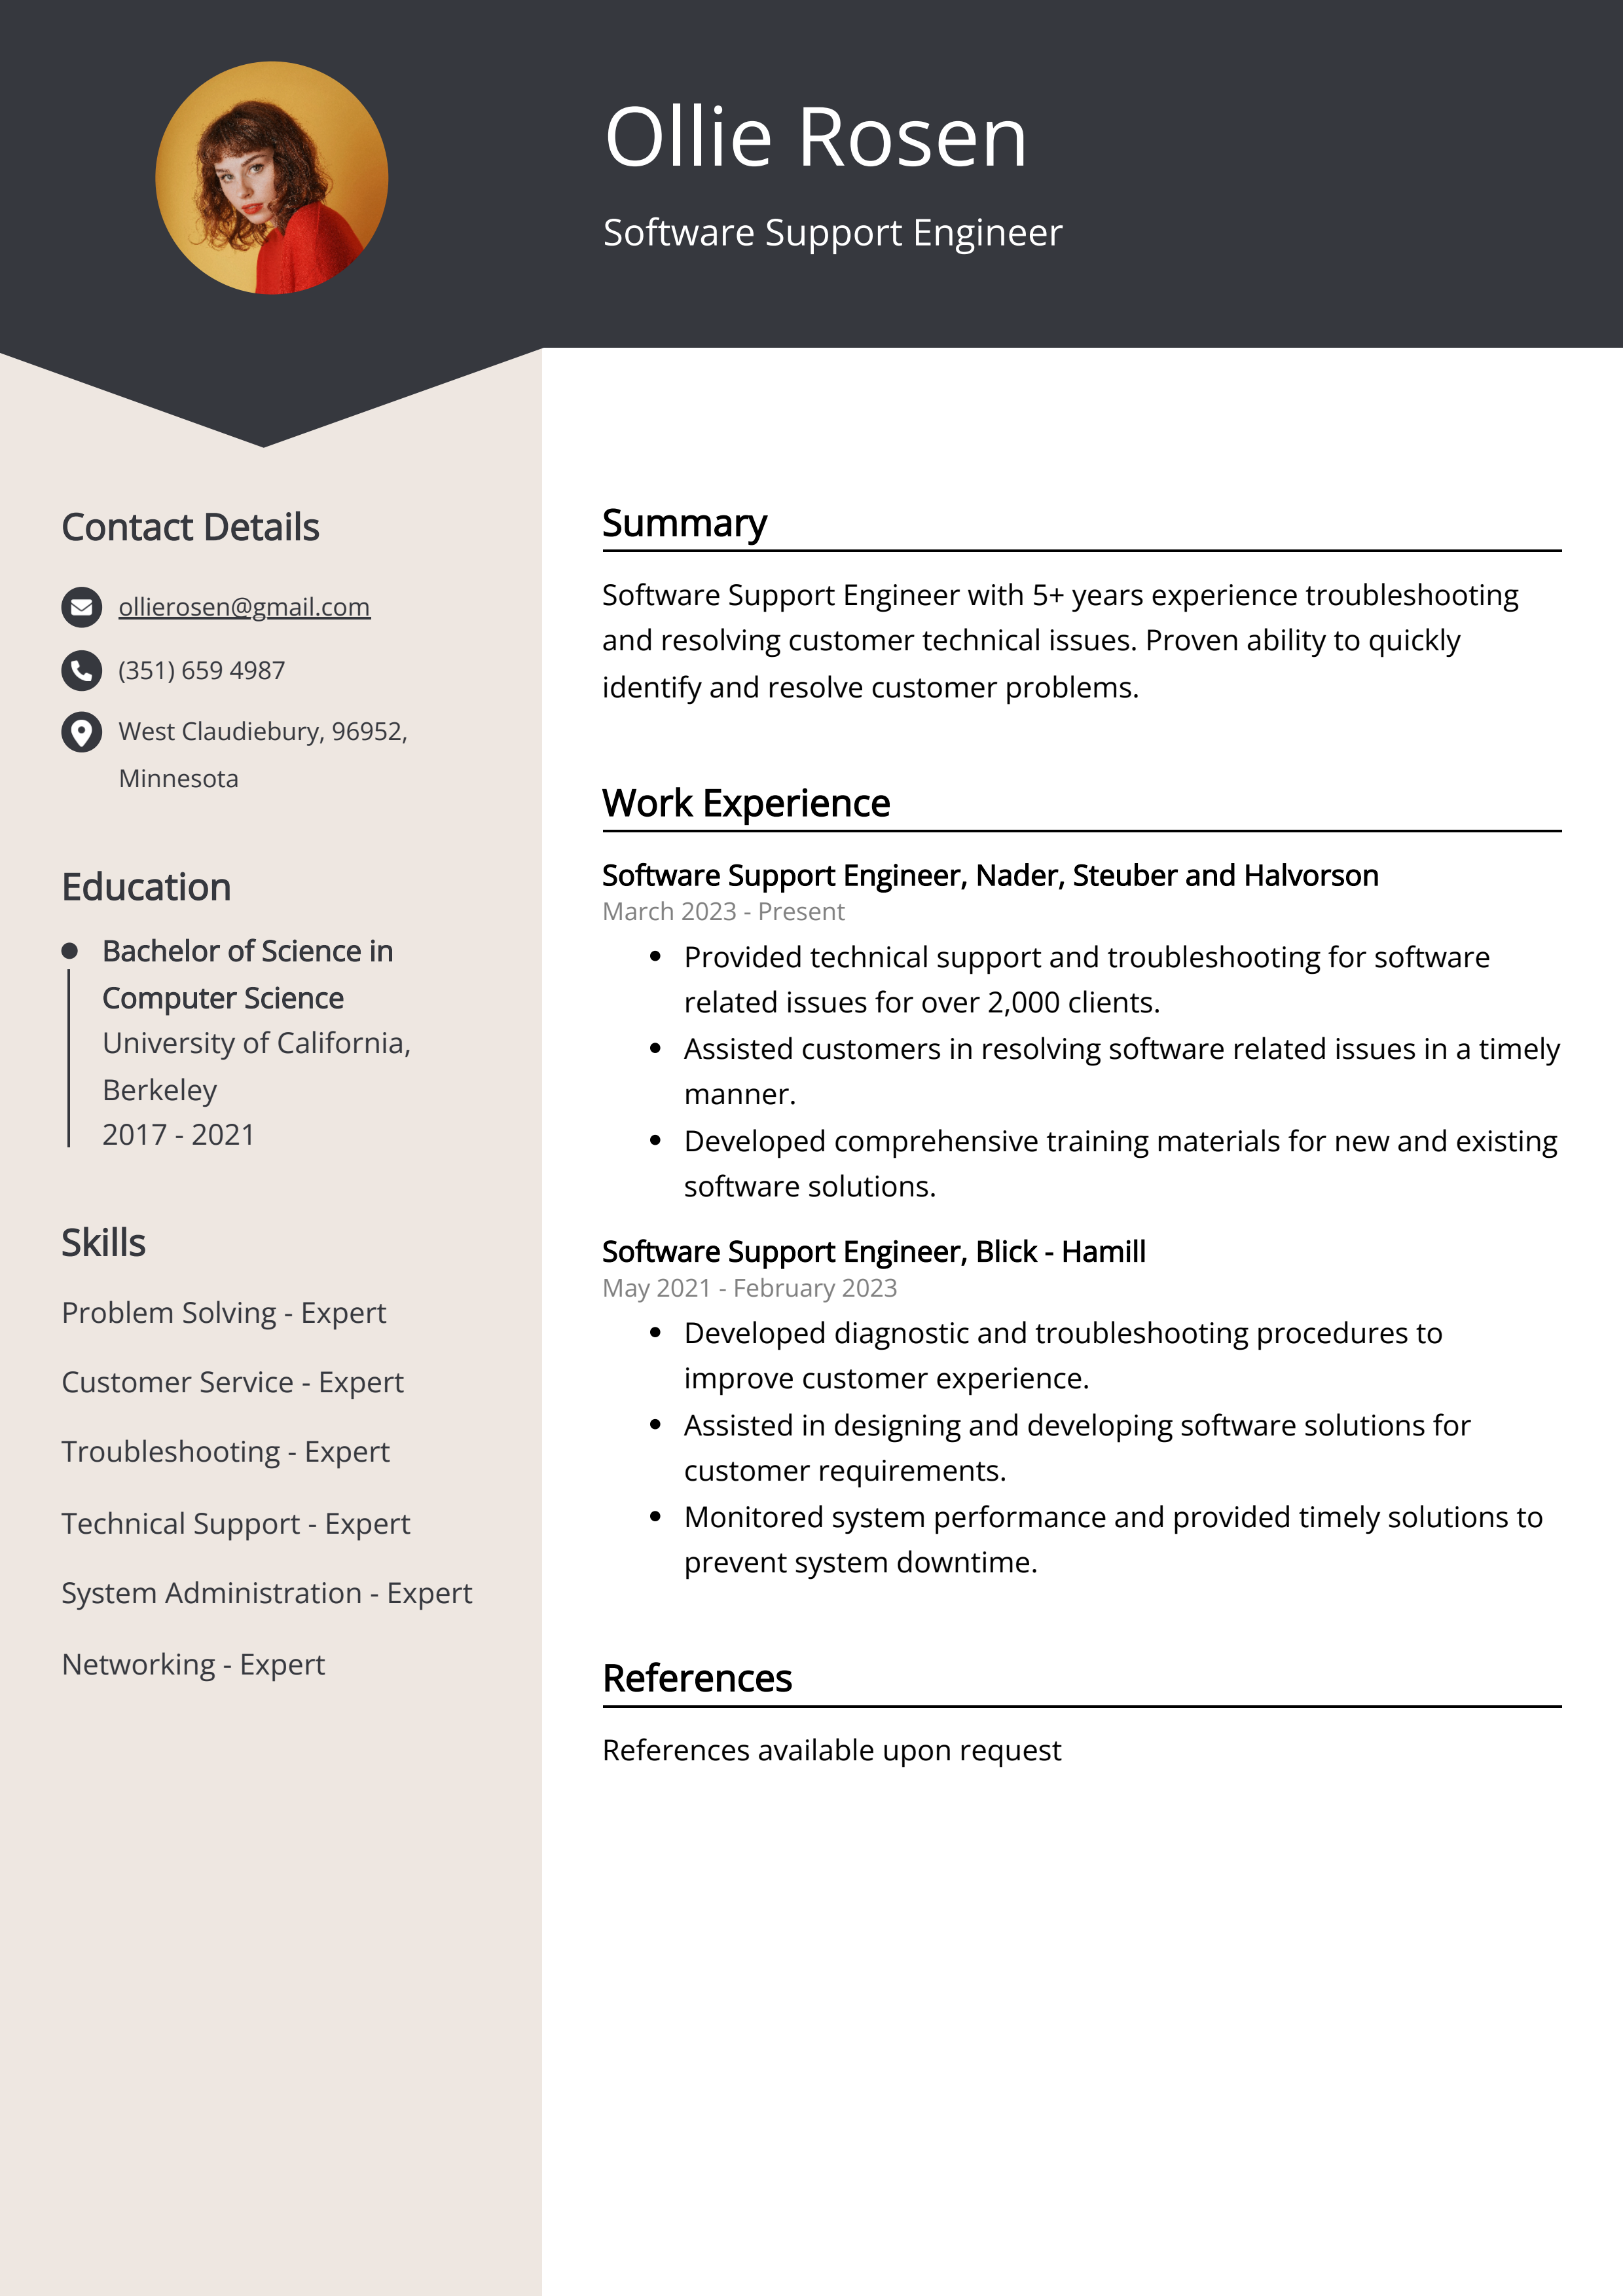 Software Support Engineer CV Example